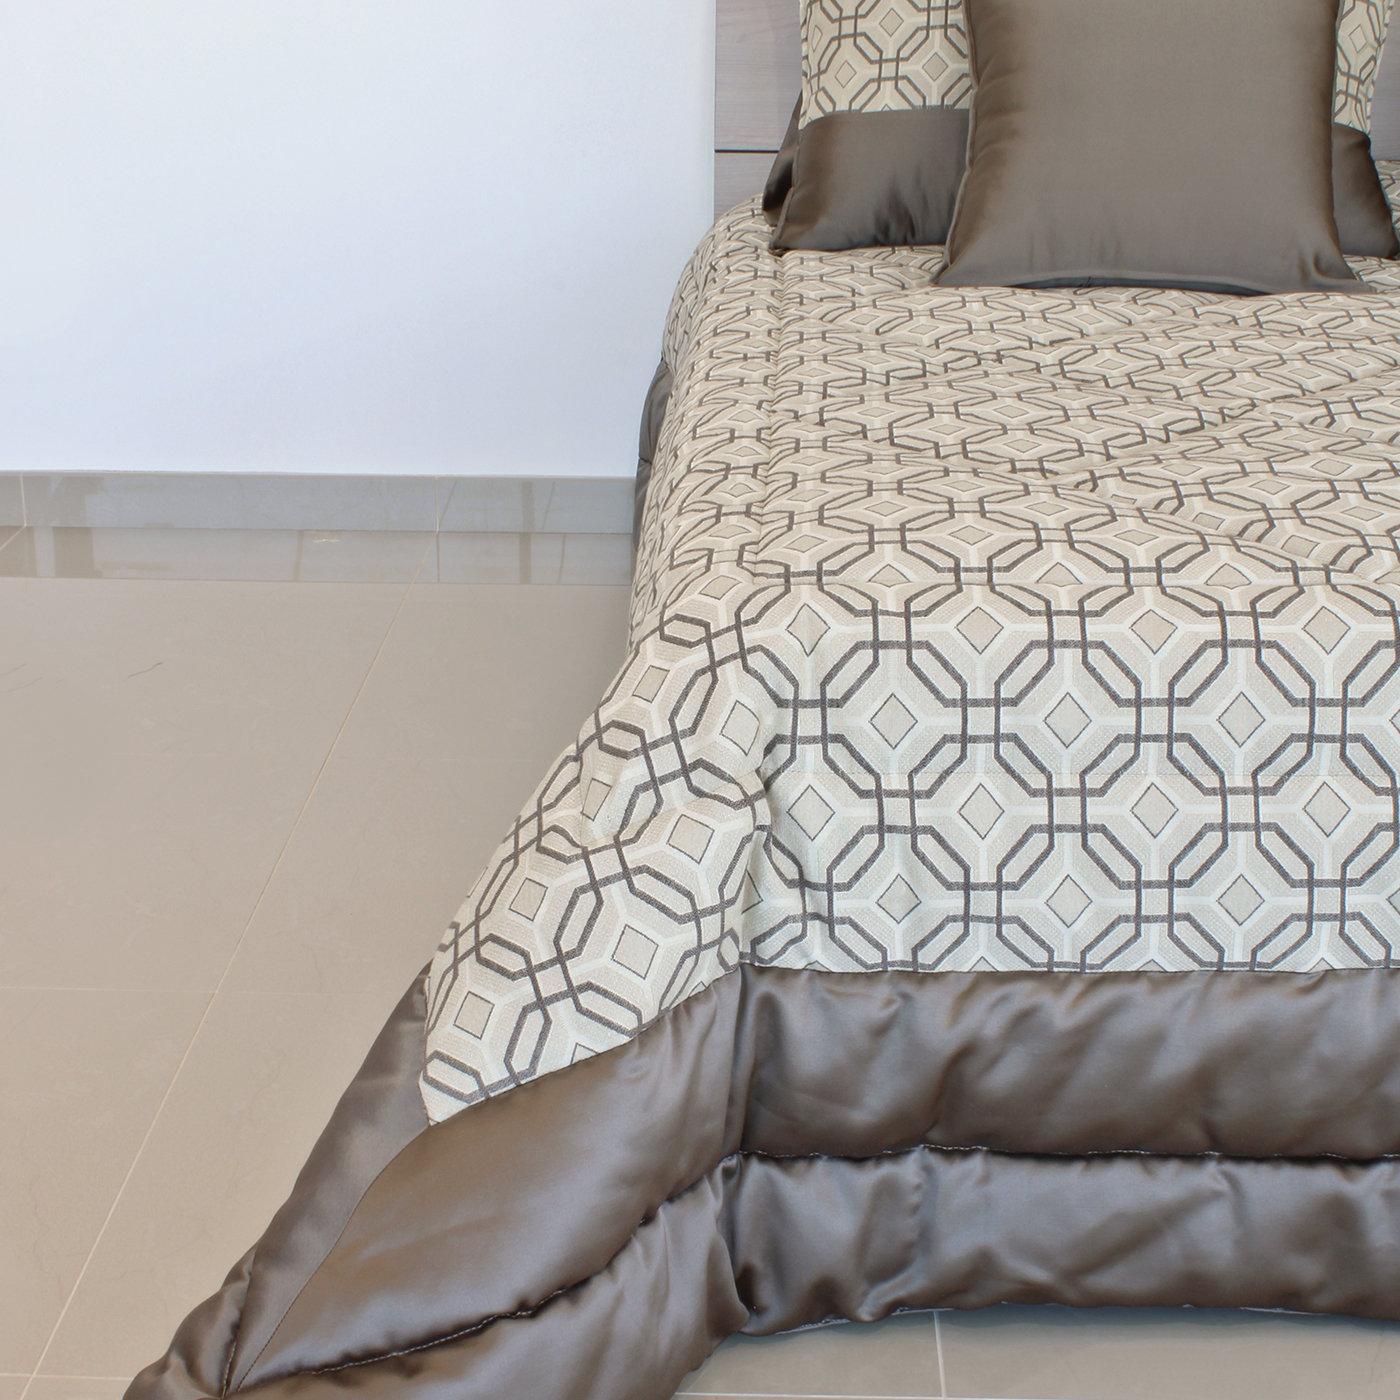 An elegant addition to any home, the Sorrento King size bedding set features a stunning quilt made of cotton and polyester. Padded with soft polyester, the quilt is enriched with a singular motif of strong geometric value enclosed in dark-colored